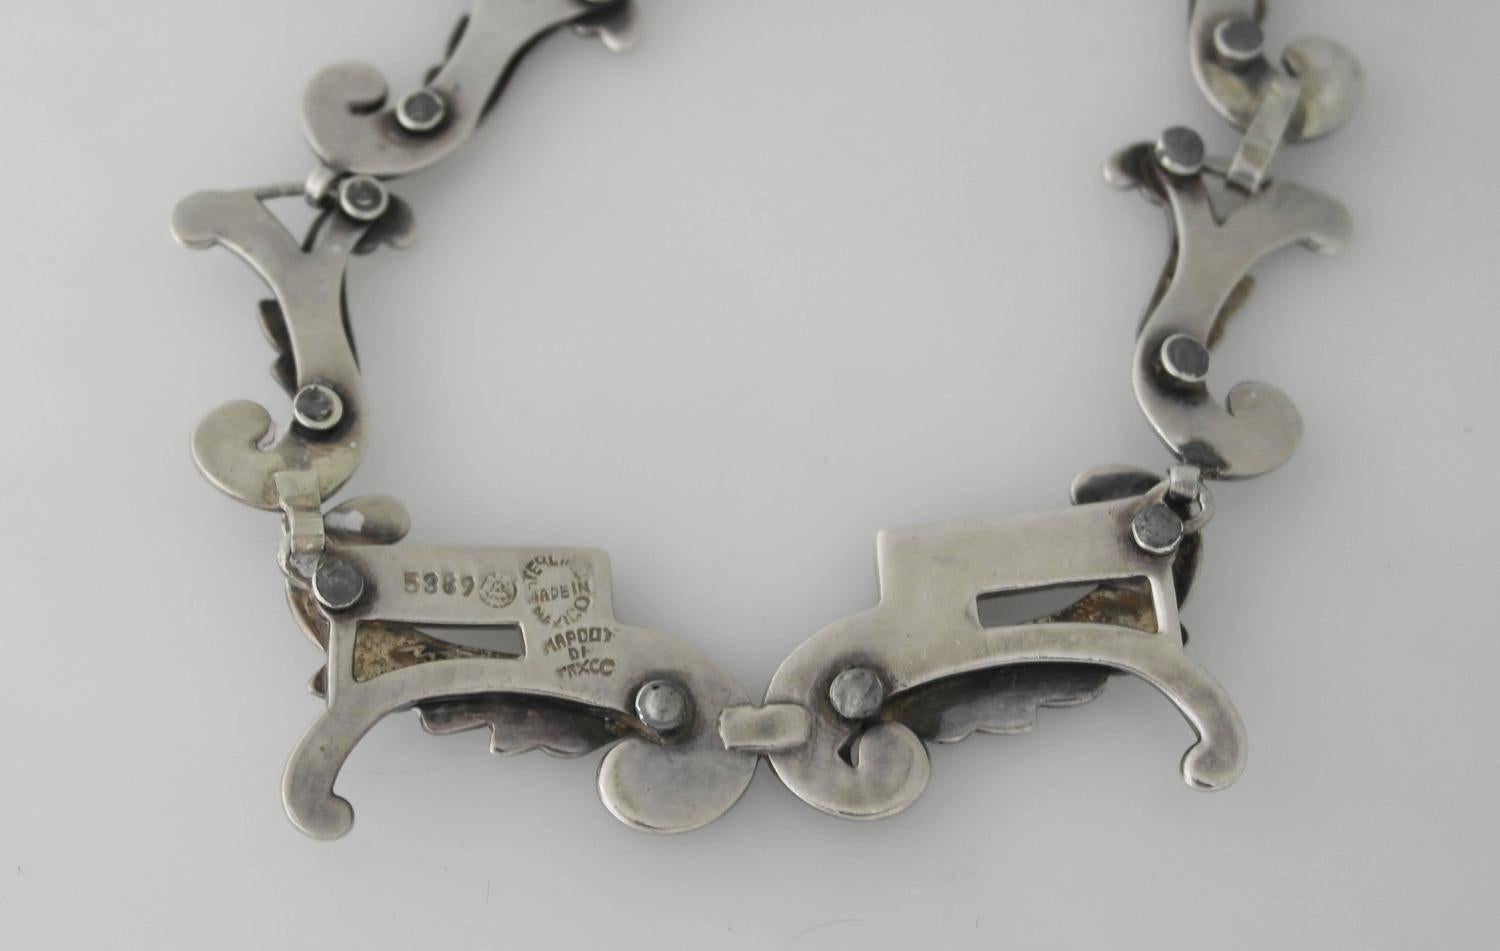 Being offered is a sterling silver bracelet by Margot de Taxco, of Taxco, Mexico. Attractive piece with a silver leaf motif & enameled scroll on each link; tongue & box closure. Dimensions: 15 inches x 1 3/4 inches at its widest. Marked as